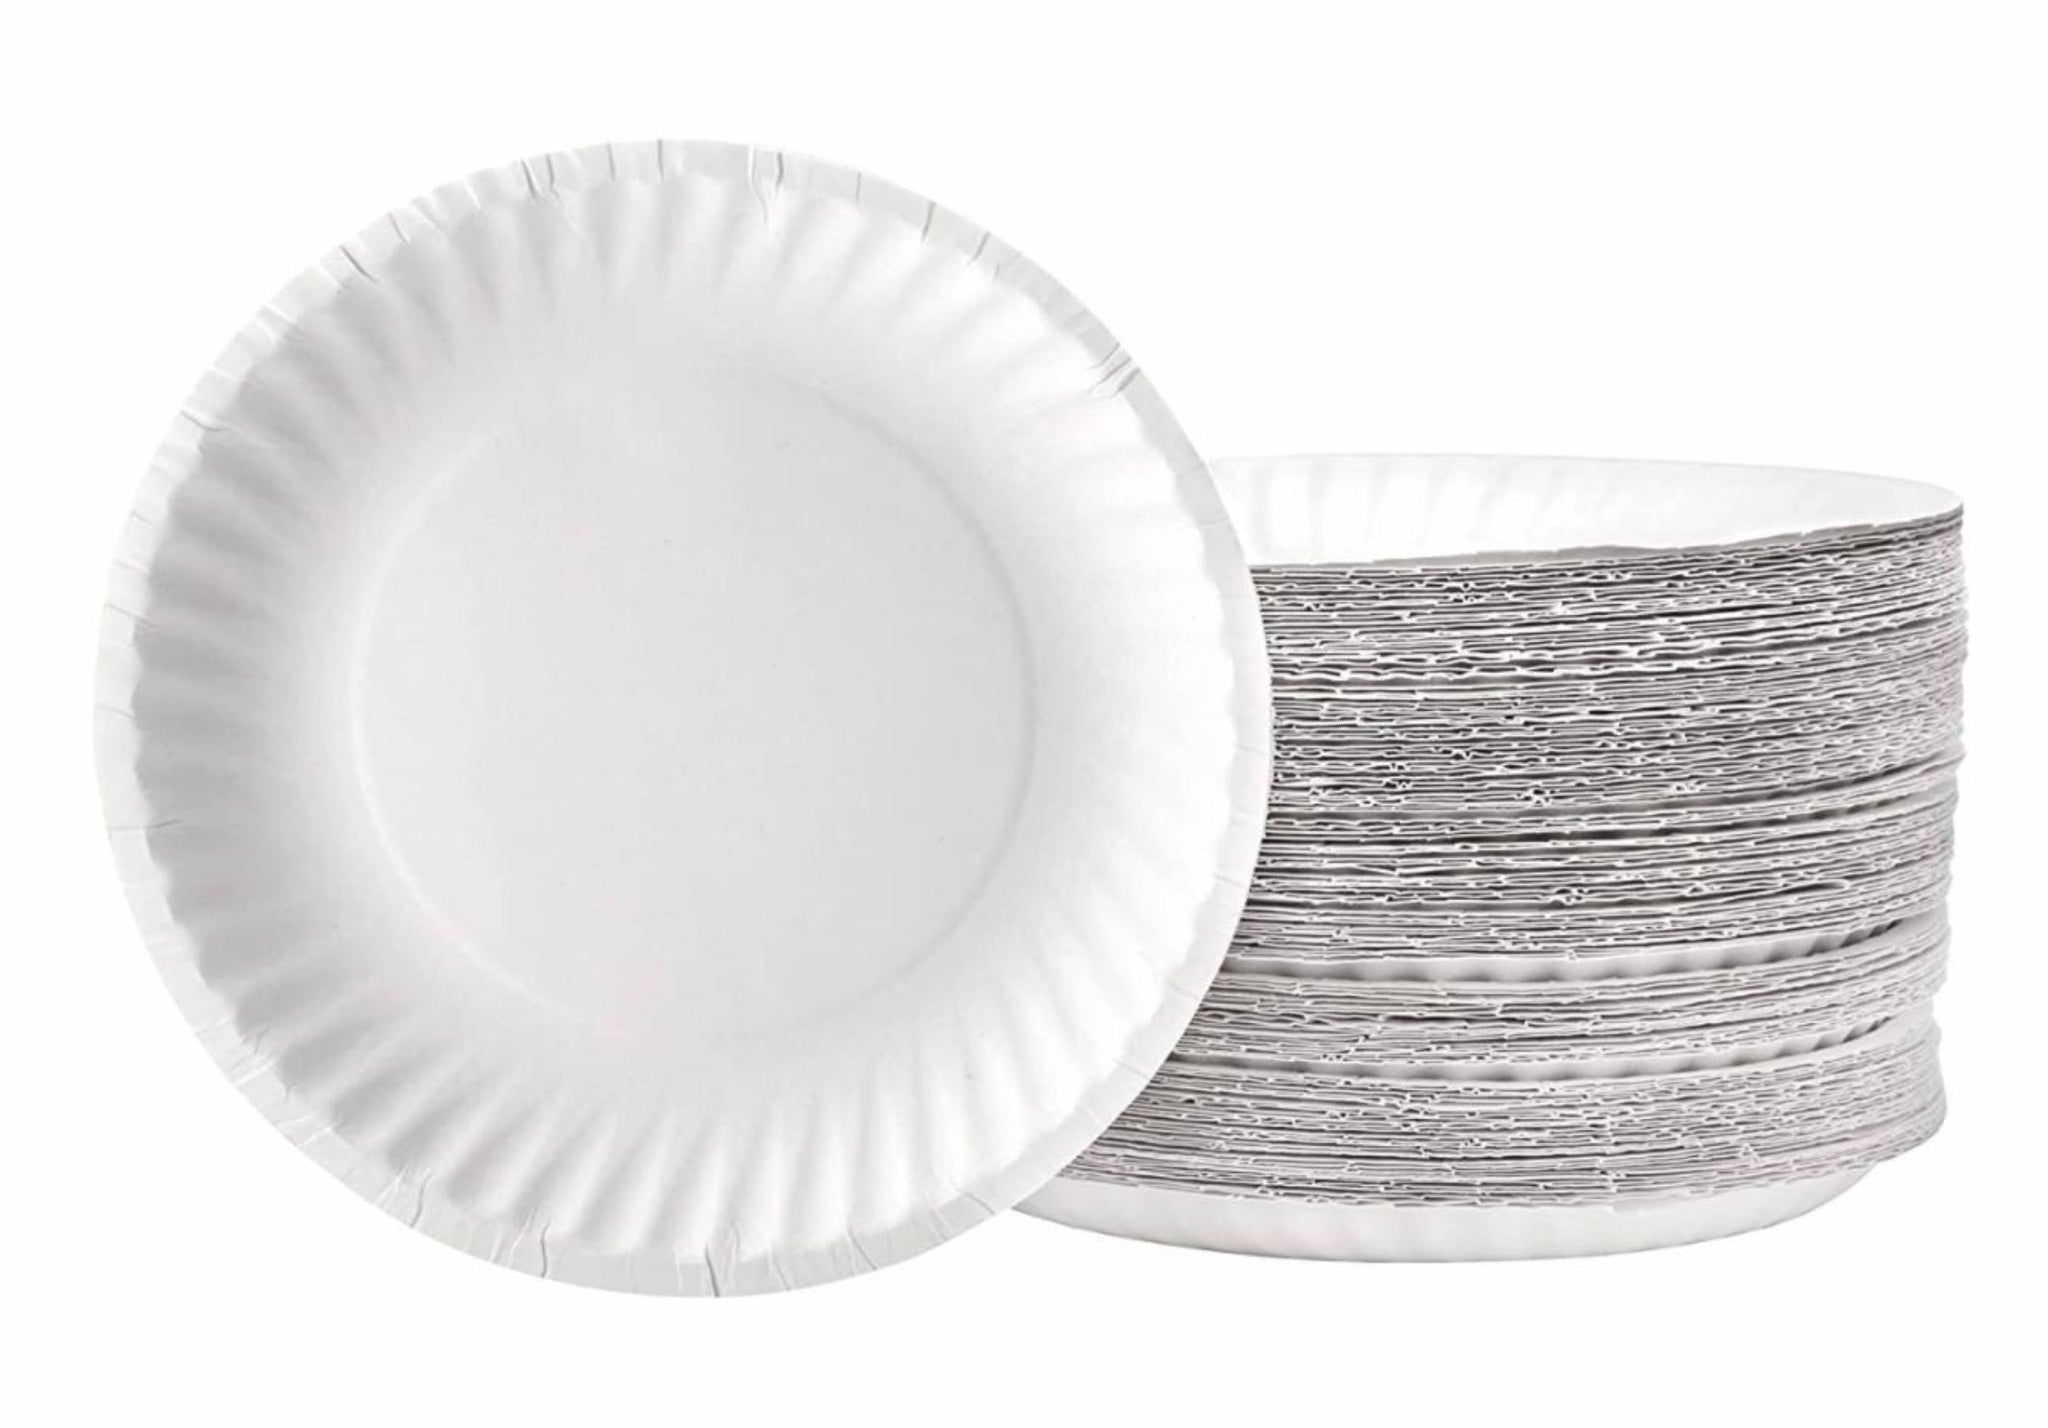 300 PACK] White Disposable Paper Plates 6 Inch by EcoQuality - Perfect for  Parties, BBQ, Catering, Office, Event's, Pizza, Restaurants, Recyclable,  Compostable and Microwave Safe 